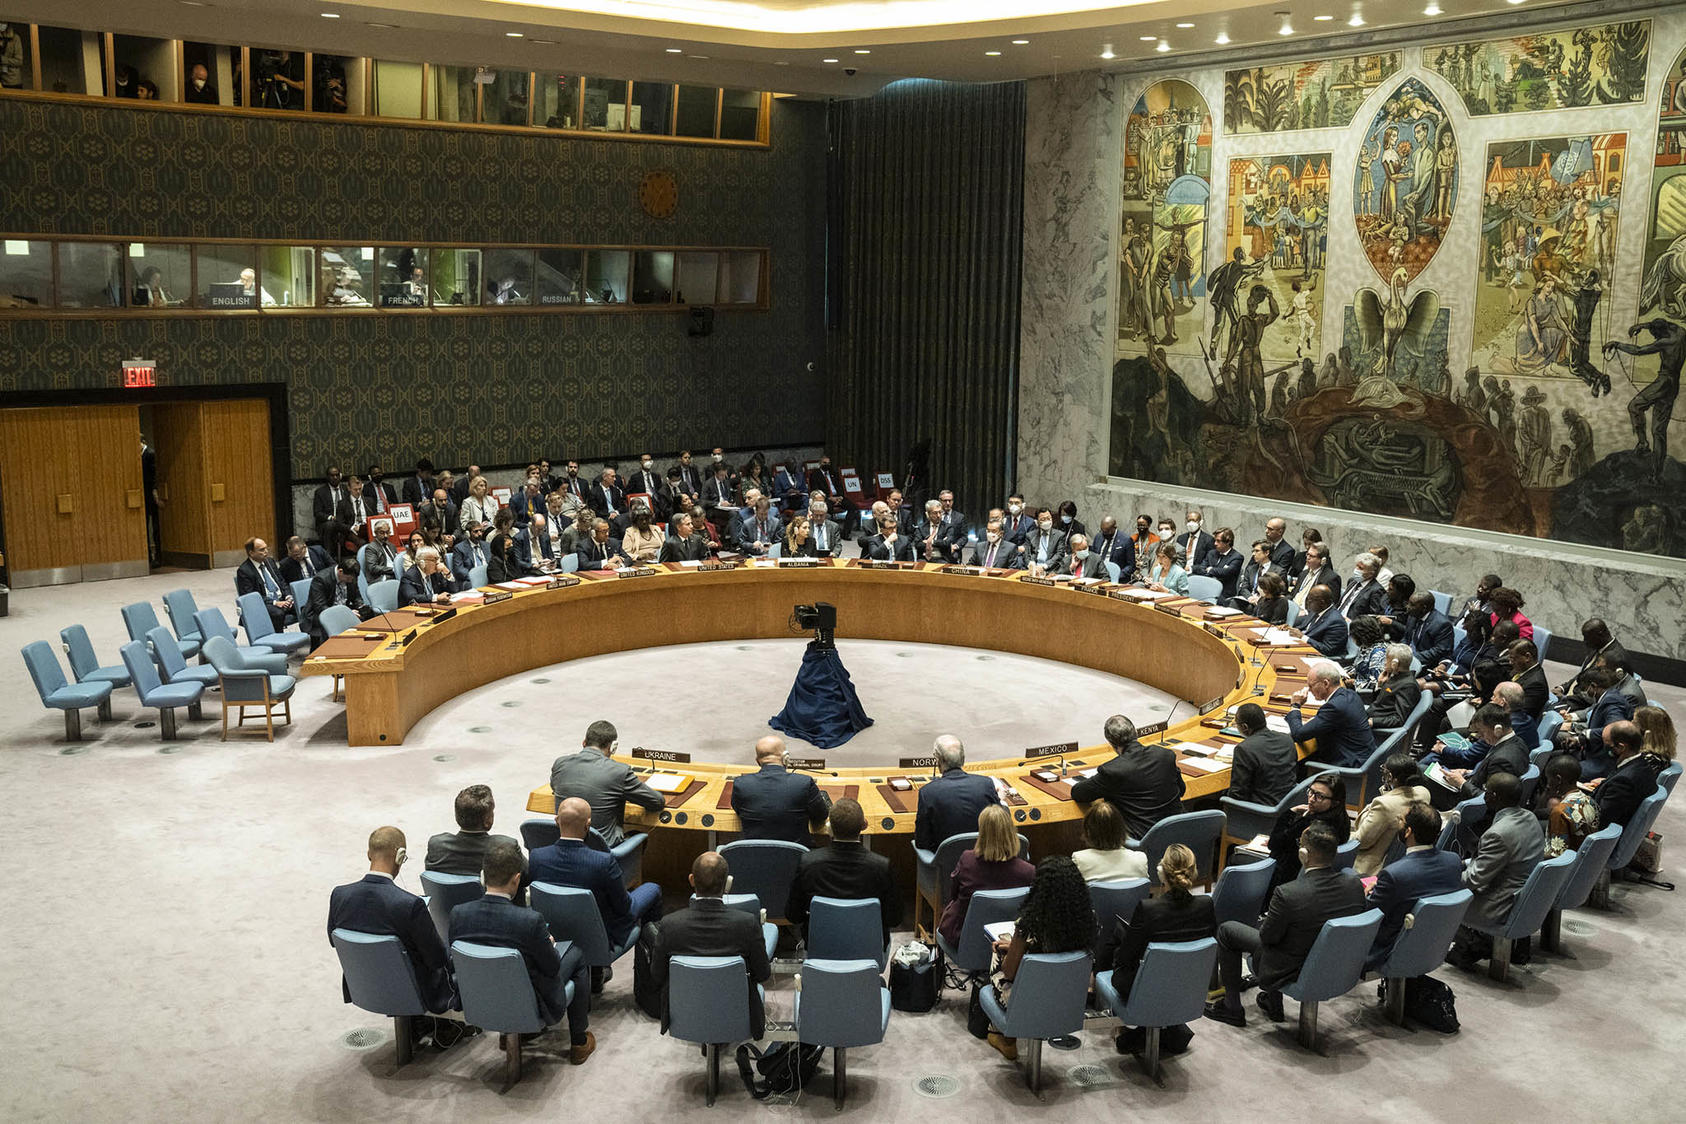 The U.N. Security Council meets at the U.N. Headquarters in New York City. September 22, 2022. (Haiyun Jiang/The New York Times)